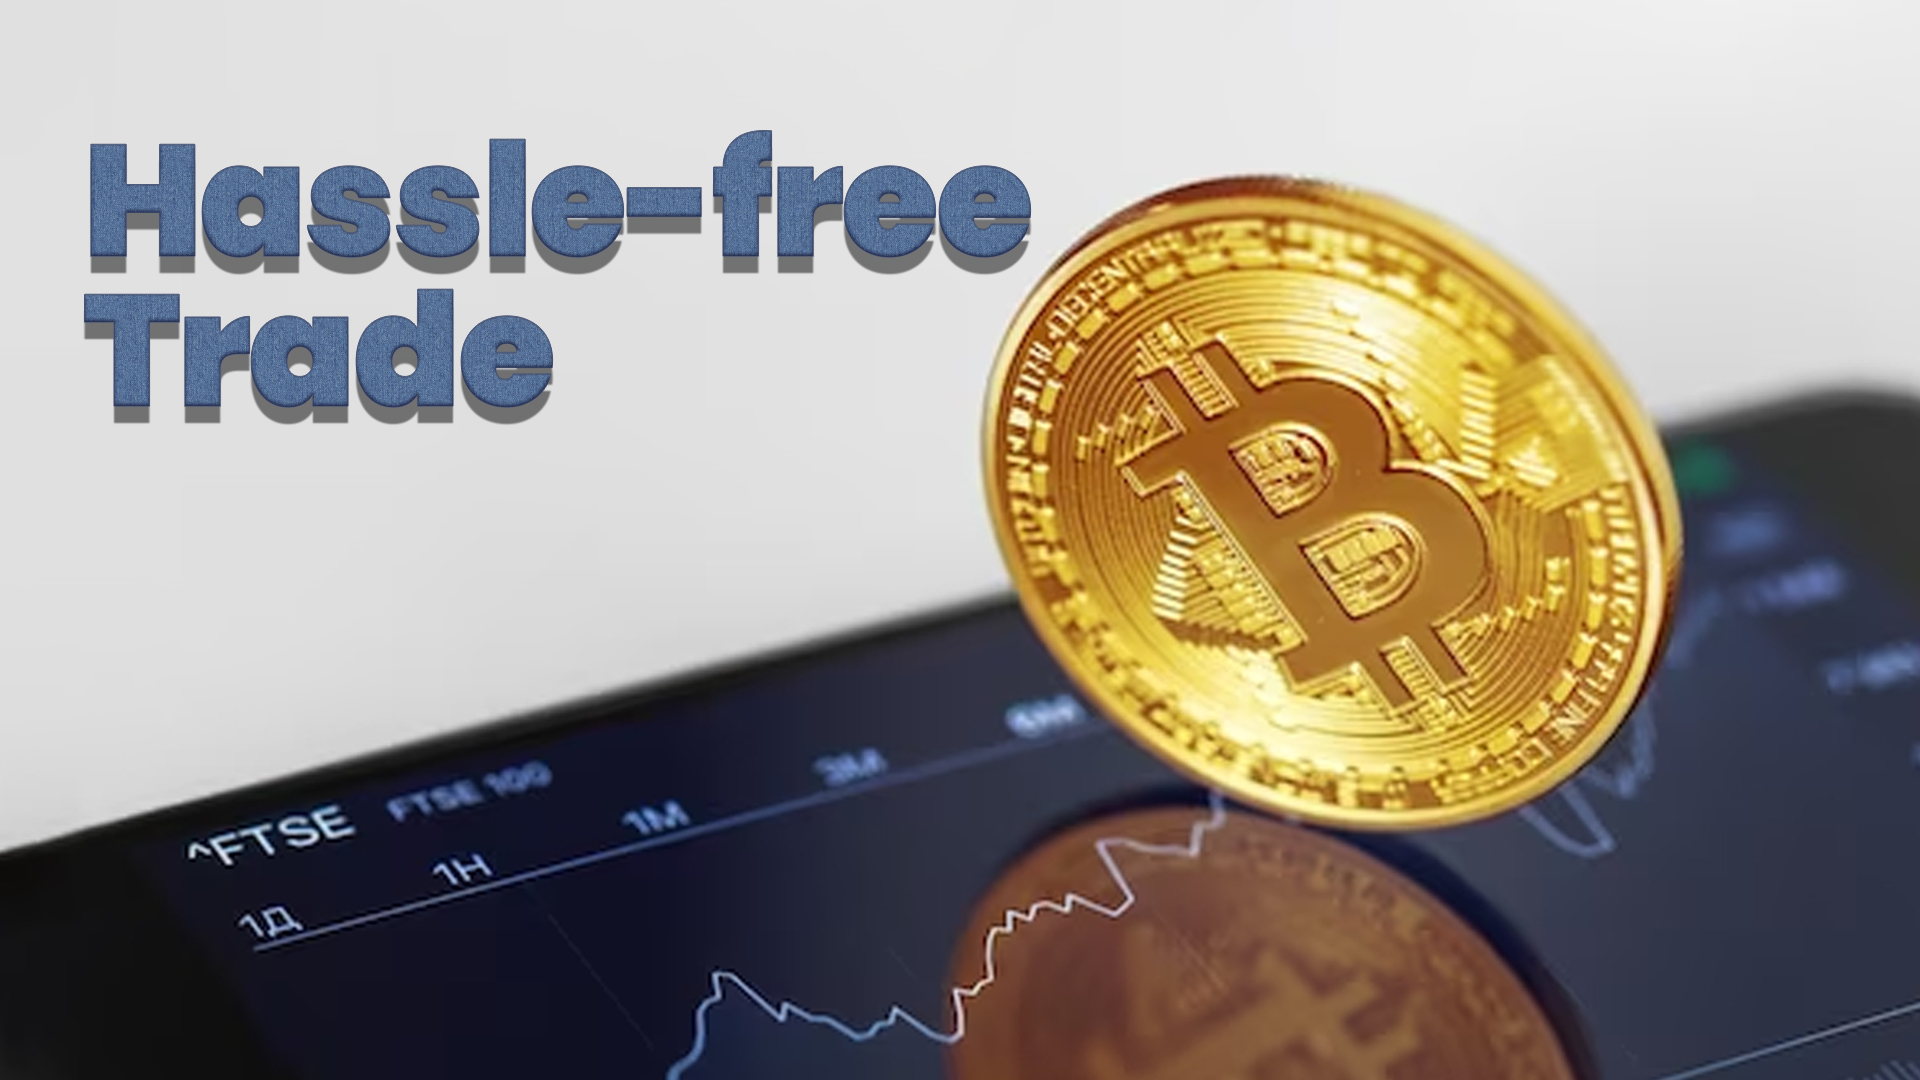 Top 5 crypto exchanges for hassle- free trade 